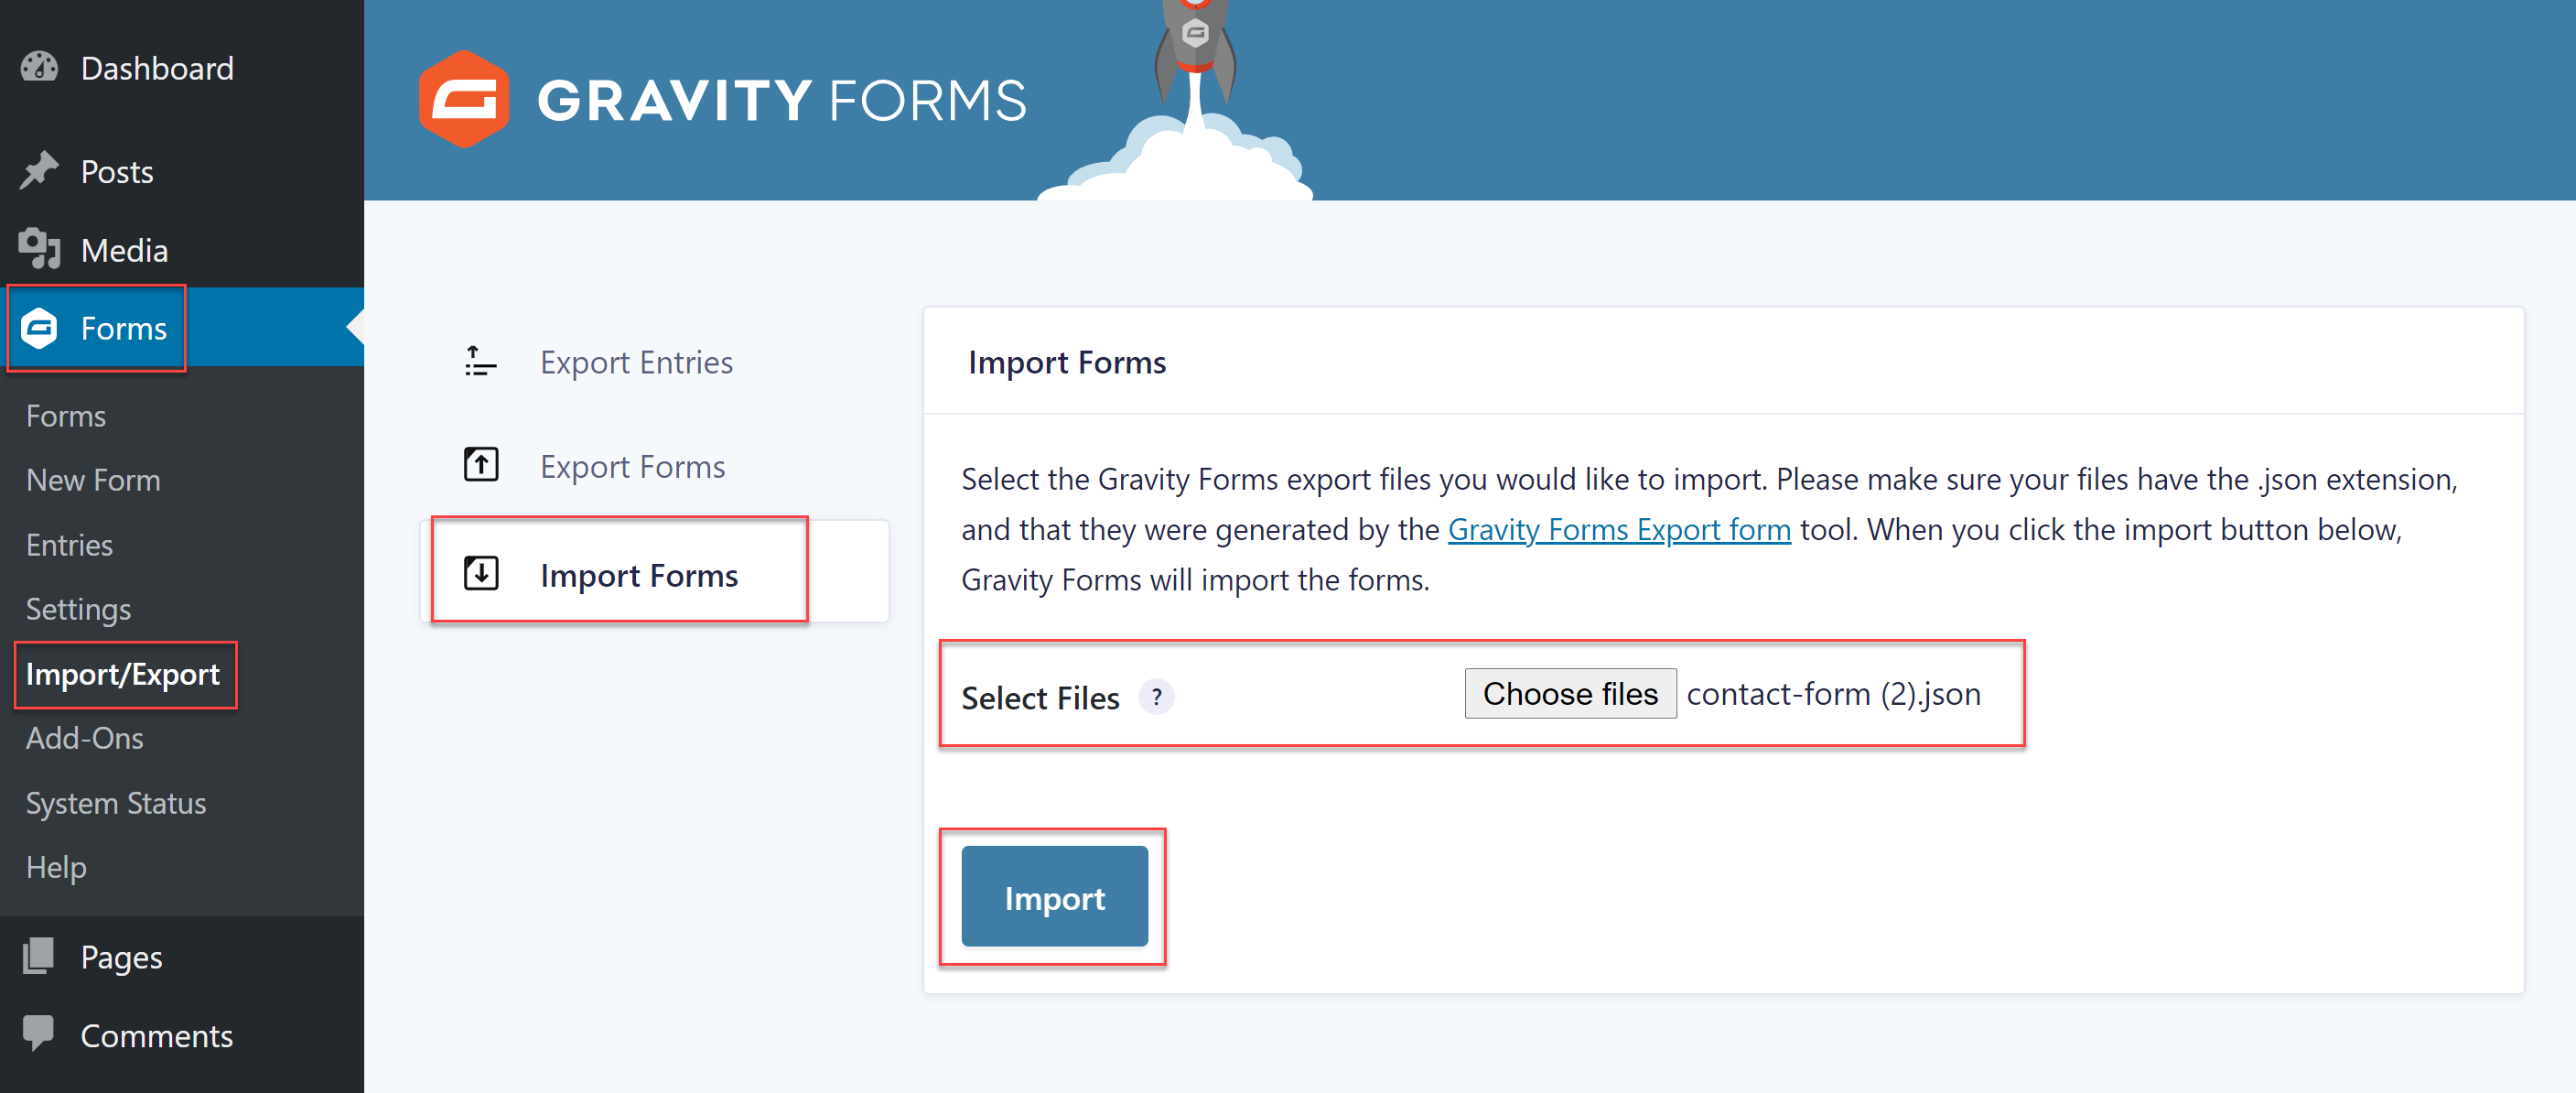 how to get gravity forms license key